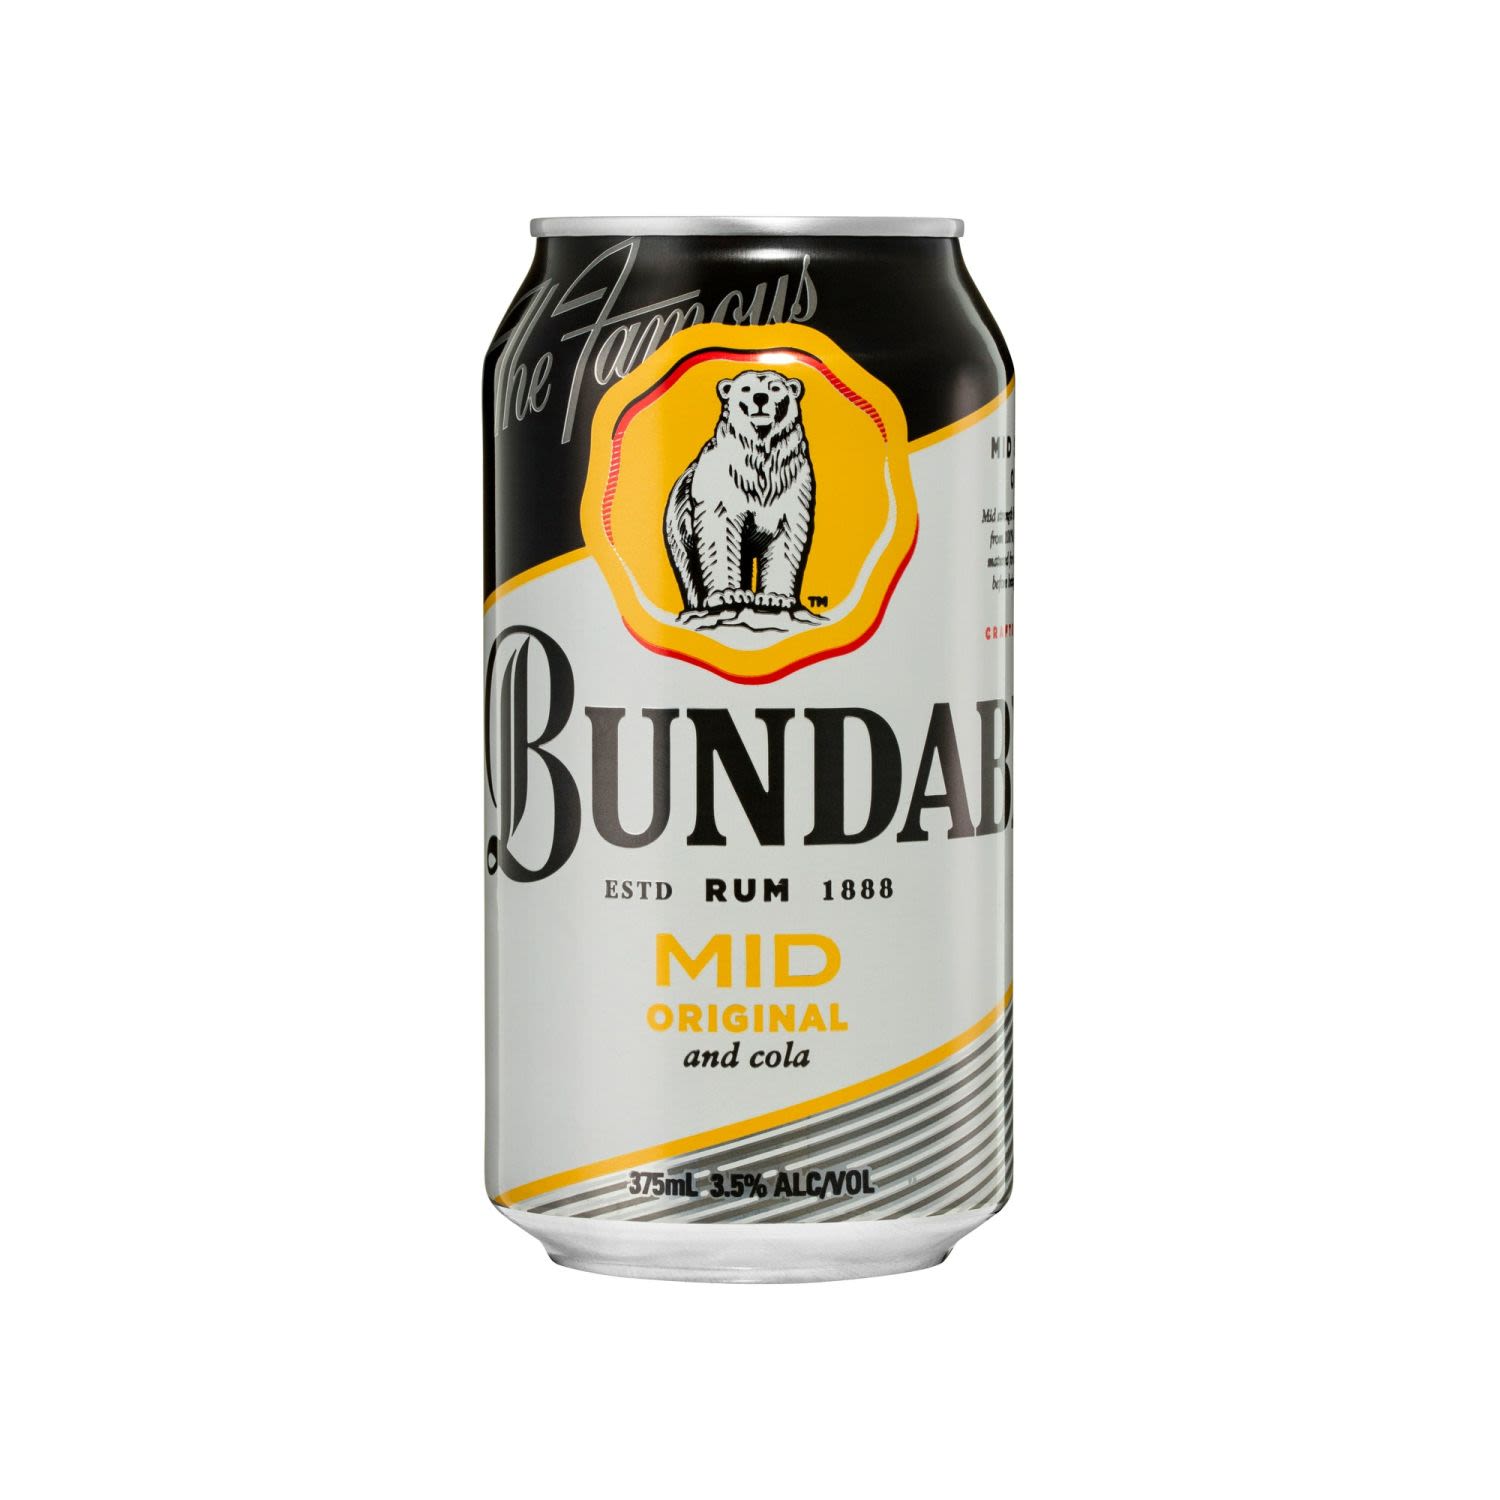 Sweetly scented with hints of oak, complimented by the sweetness of the cola<br /> <br />Alcohol Volume: 3.50%<br /><br />Pack Format: Can<br /><br />Standard Drinks: 1</br /><br />Pack Type: Can<br />